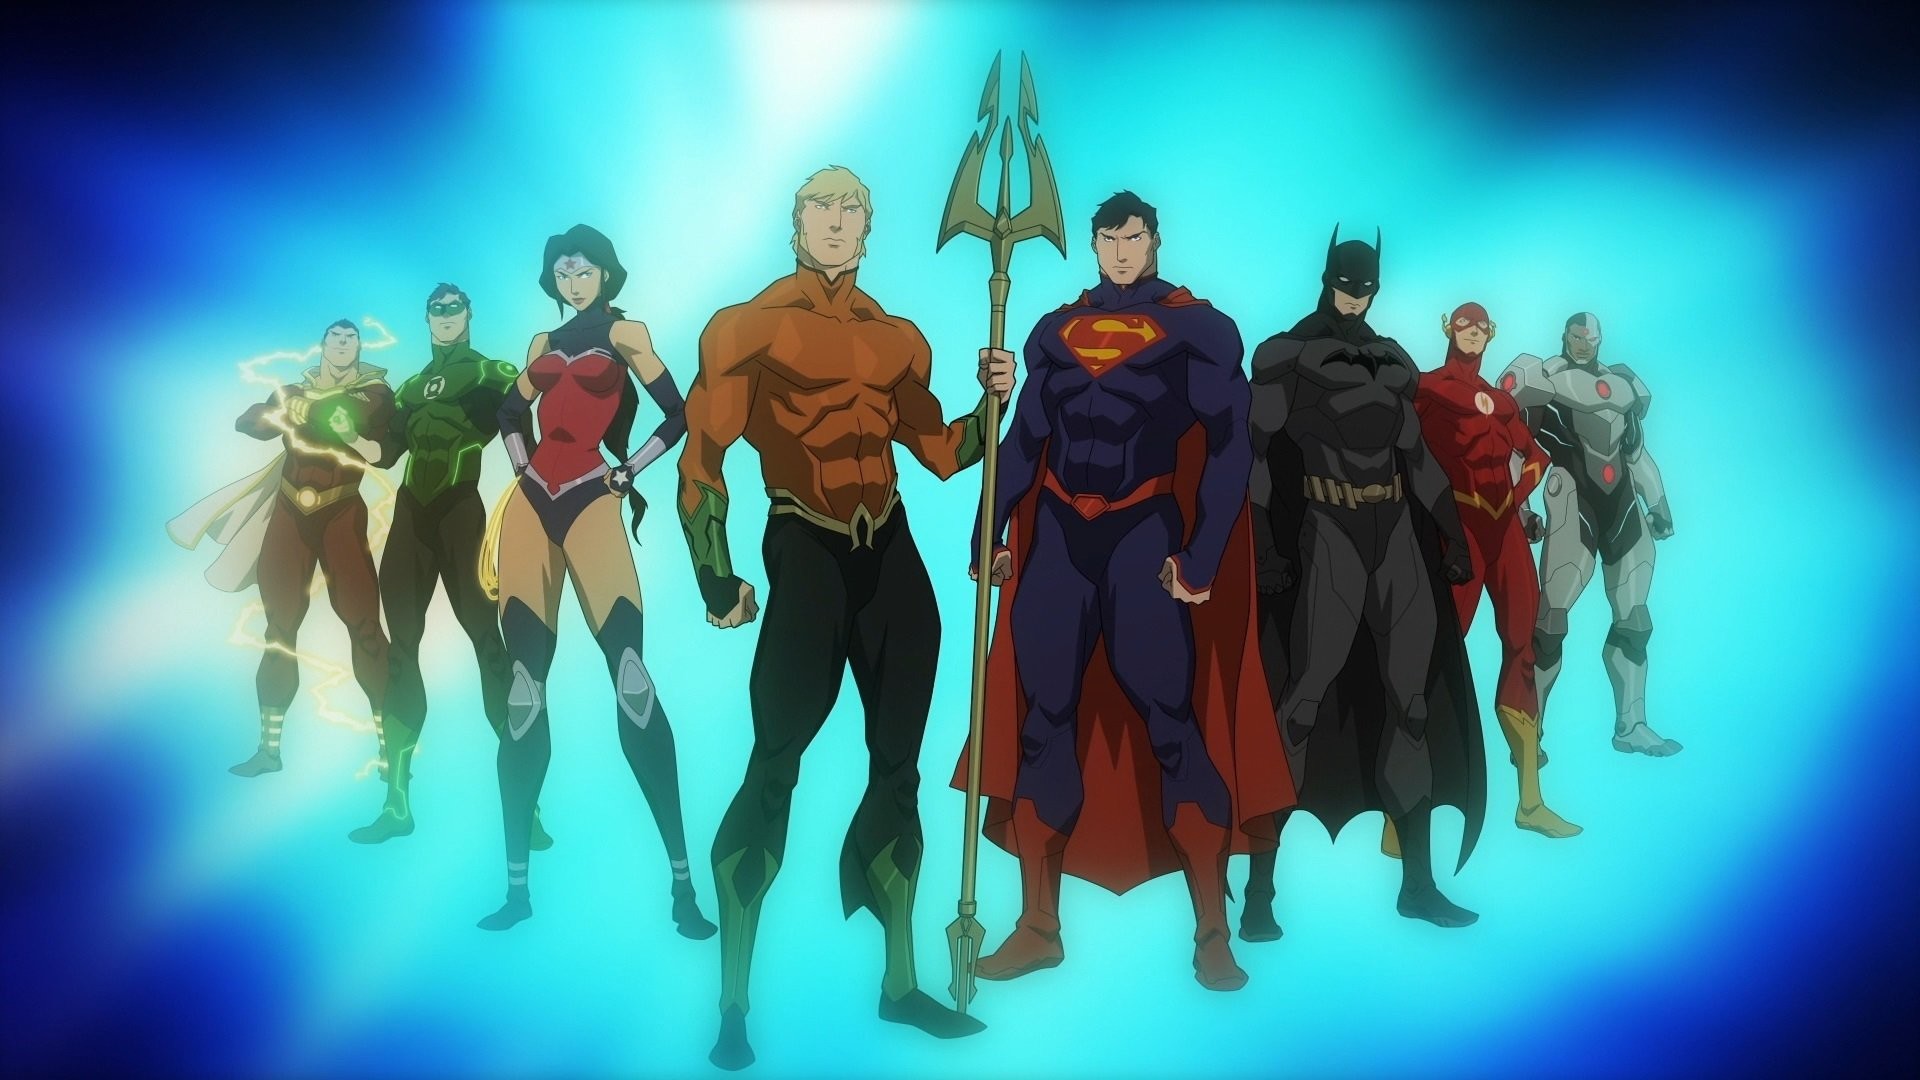 1920x1080 14 Justice League: Throne Of Atlantis HD Wallpapers | Backgrounds -  Wallpaper Abyss. Aquaman | DC